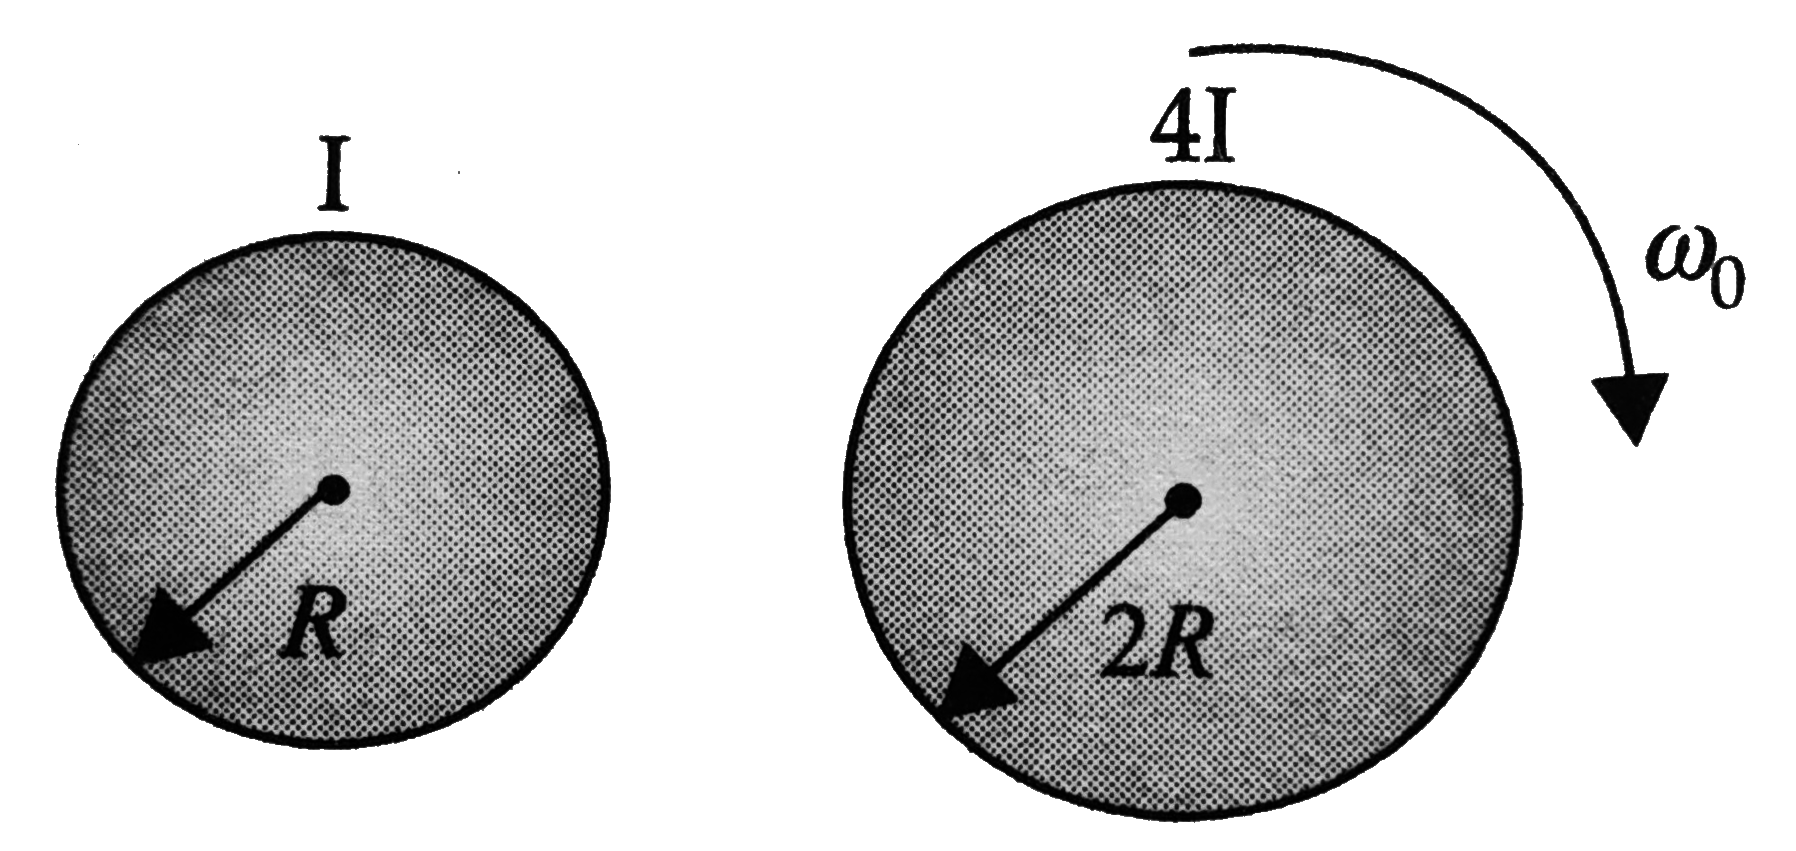 Two cylinders having radii 2R and R and moment of inertia 4I and I about their central axes are supported by axles perpendicular to their planes. The large cylinder is initially rotating clockwise with angular velocity omega(0). The small cylinder is moved to the right until it touches the large cylinder and is caused to rotate by the frictional force between the two. Eventually slipping ceases and the two cylinders rotate at constant rates in opposite directions. During this